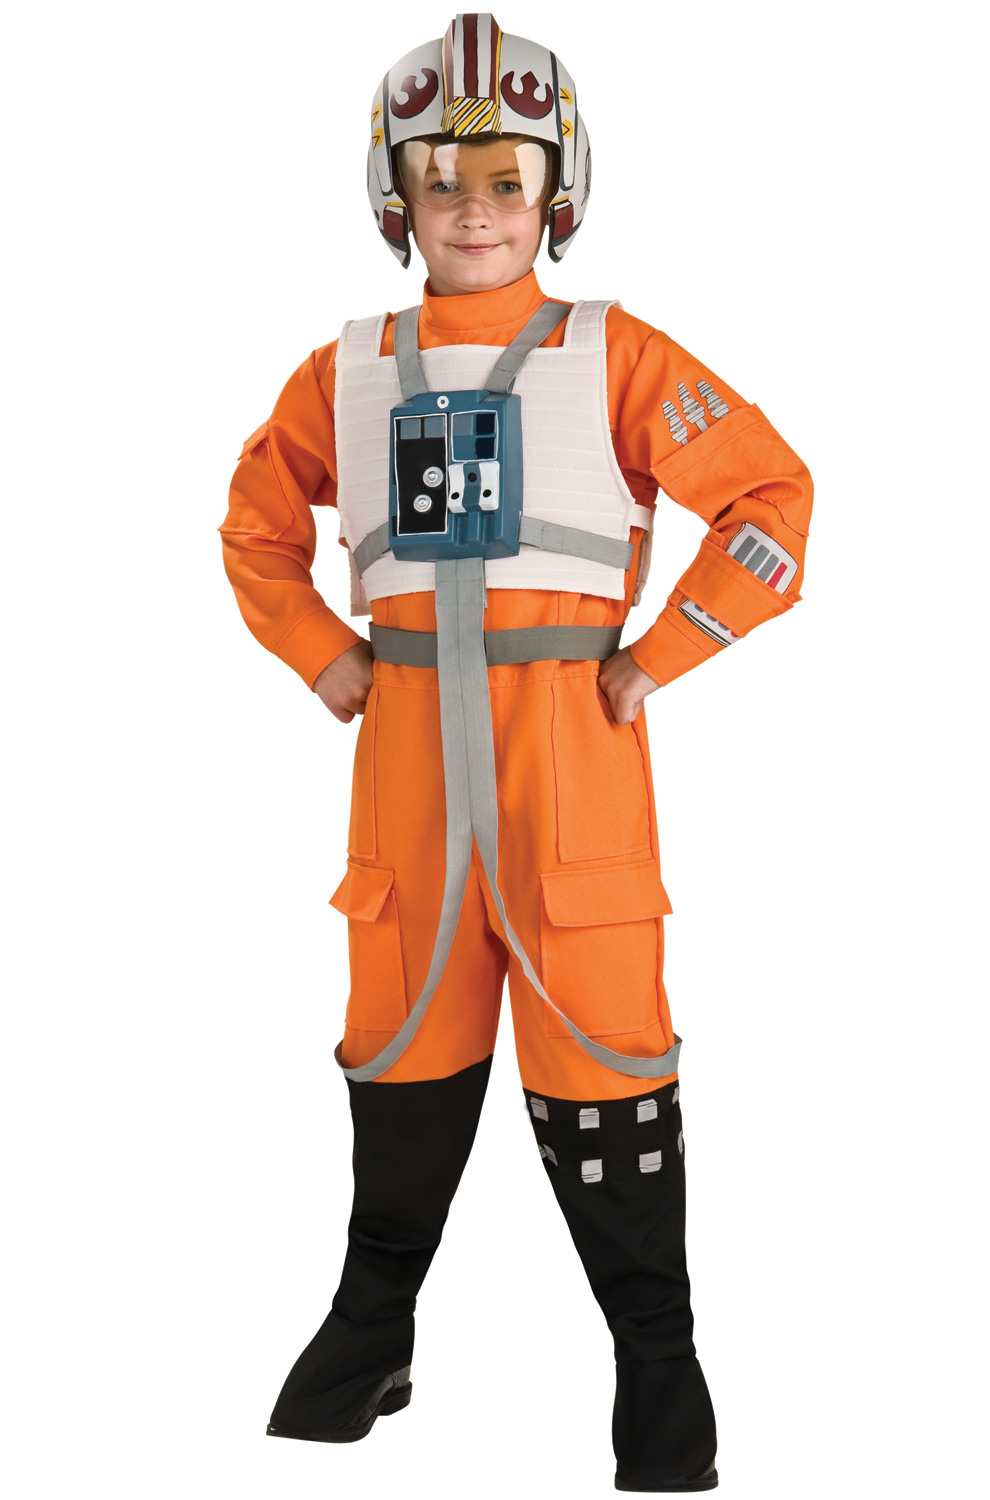 Details about   New STAR WARS X-Wing Fighter Pilot Costume L 10-12 